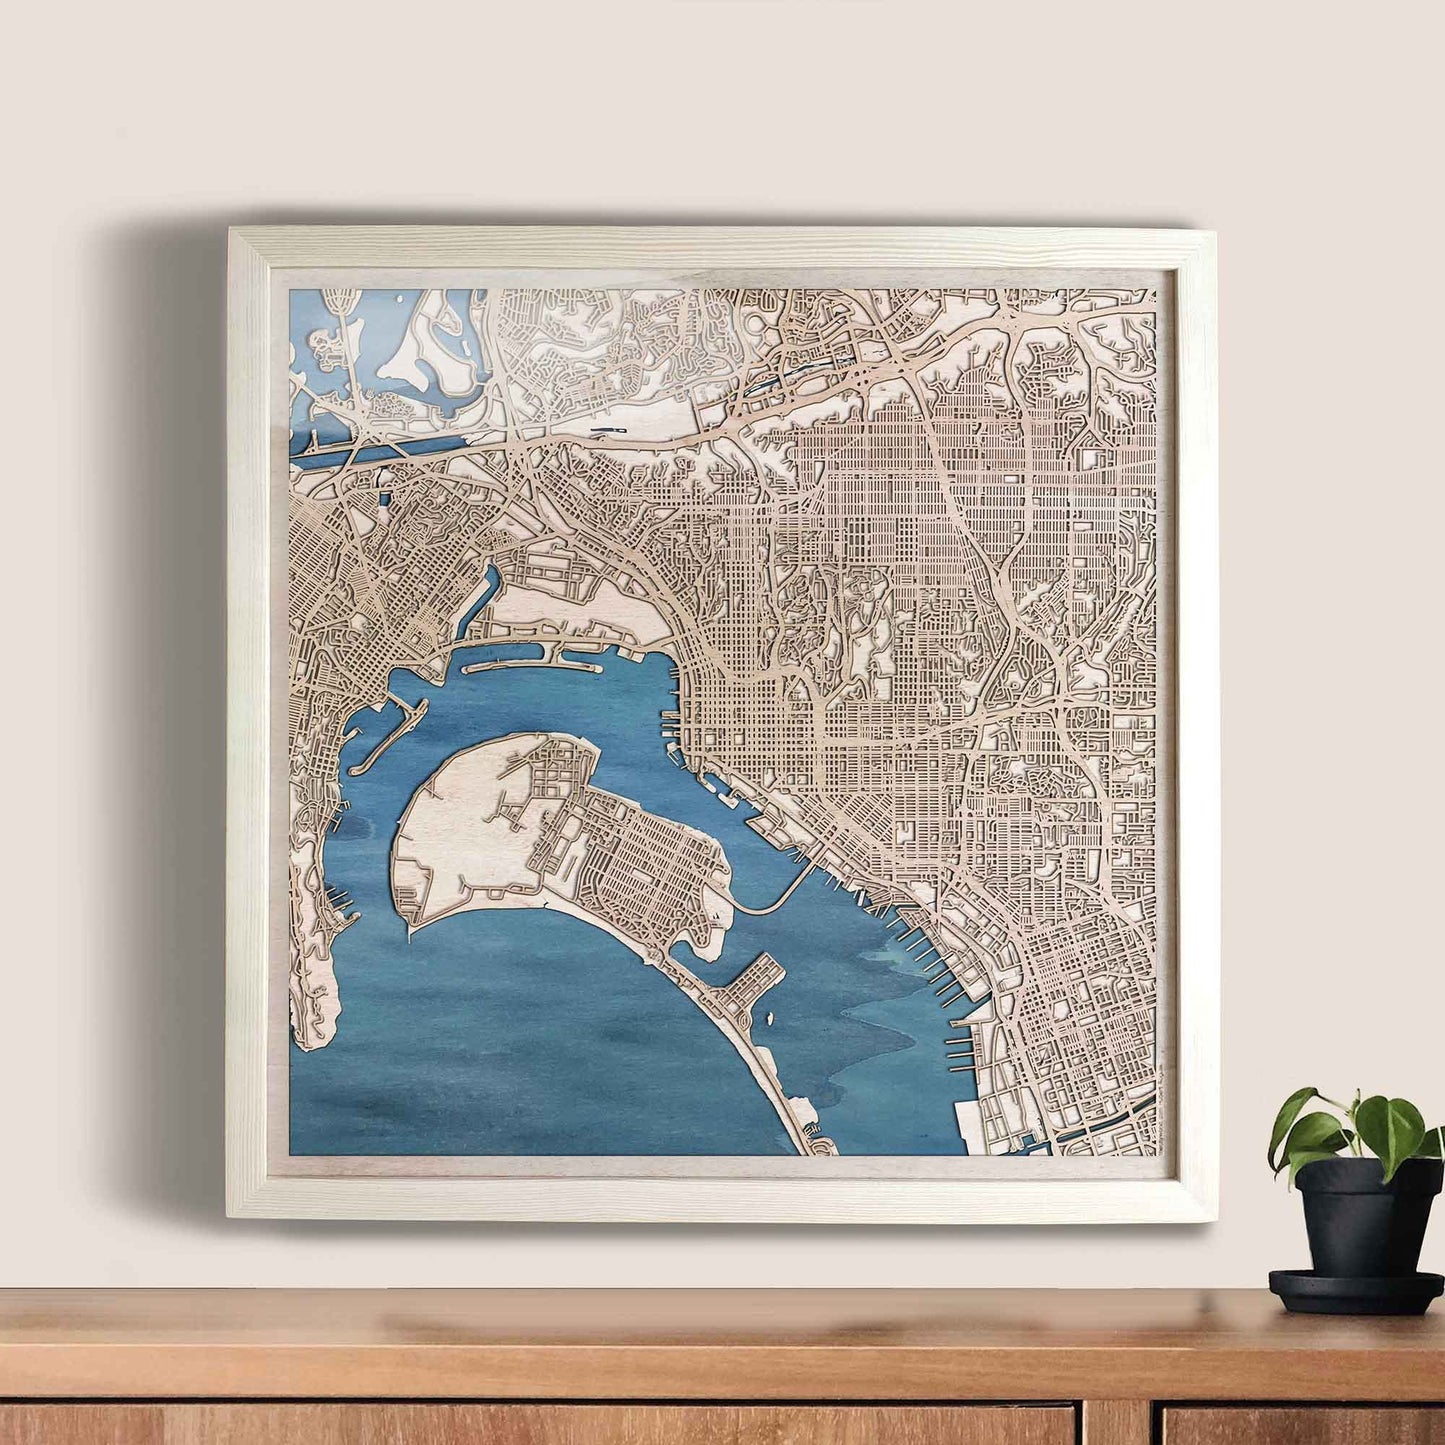 San Diego Wooden Map by CityWood - Custom Wood Map Art - Unique Laser Cut Engraved - Anniversary Gift